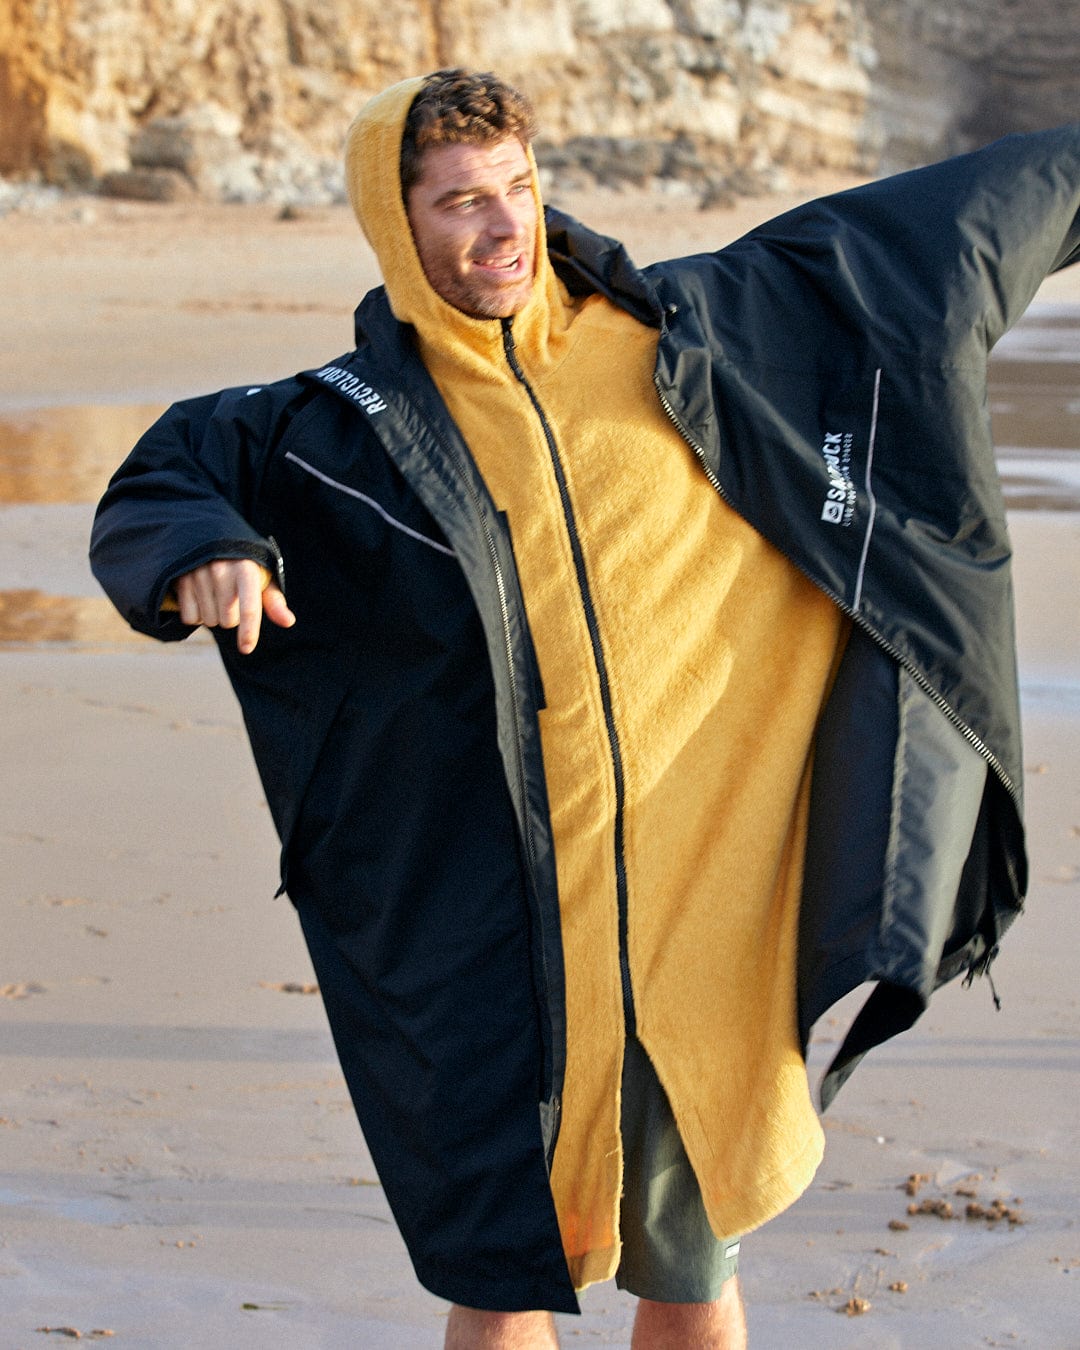 A man in a Saltrock 3 in 1 Recycled Four Seasons Changing Robe - Black/Yellow smiles and spreads his arms on a sandy beach.